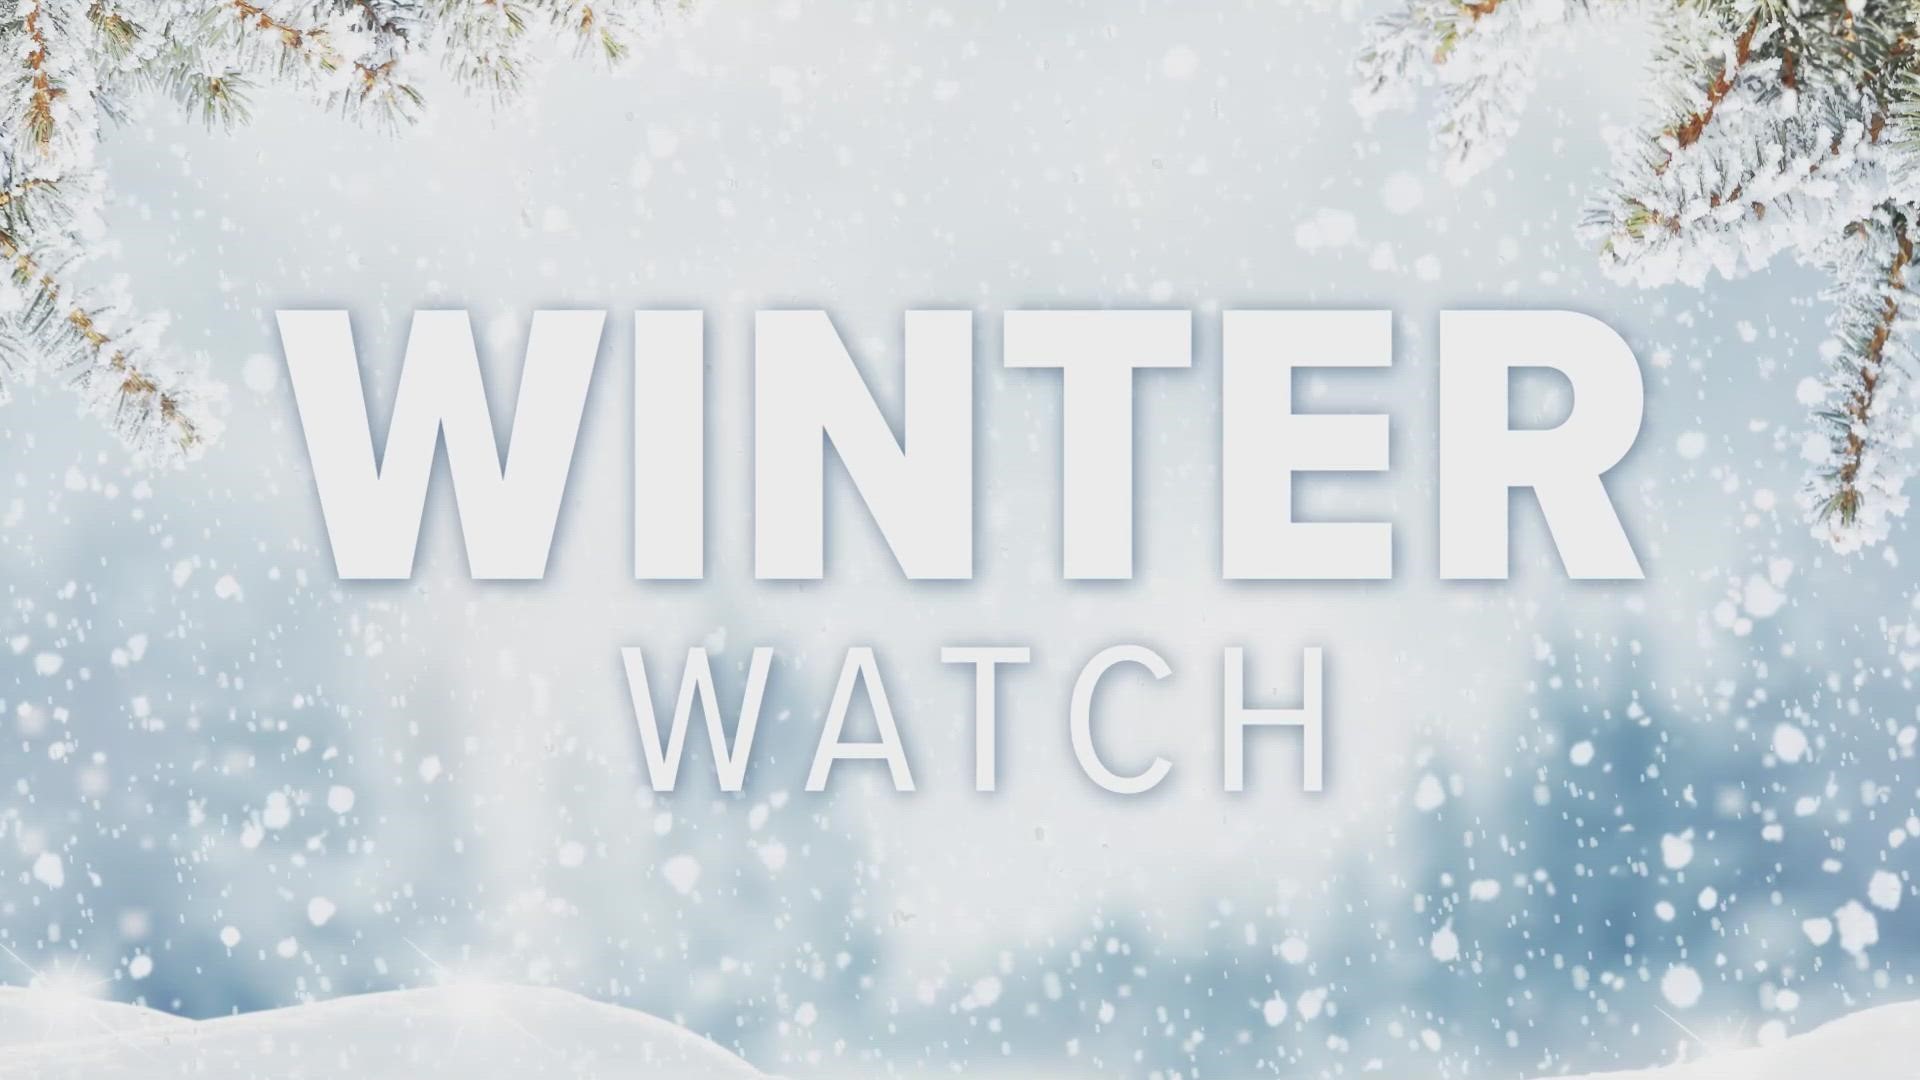 The FOX61 Weather Watch Team in Connecticut shares the wonders and dangers winter can bring.